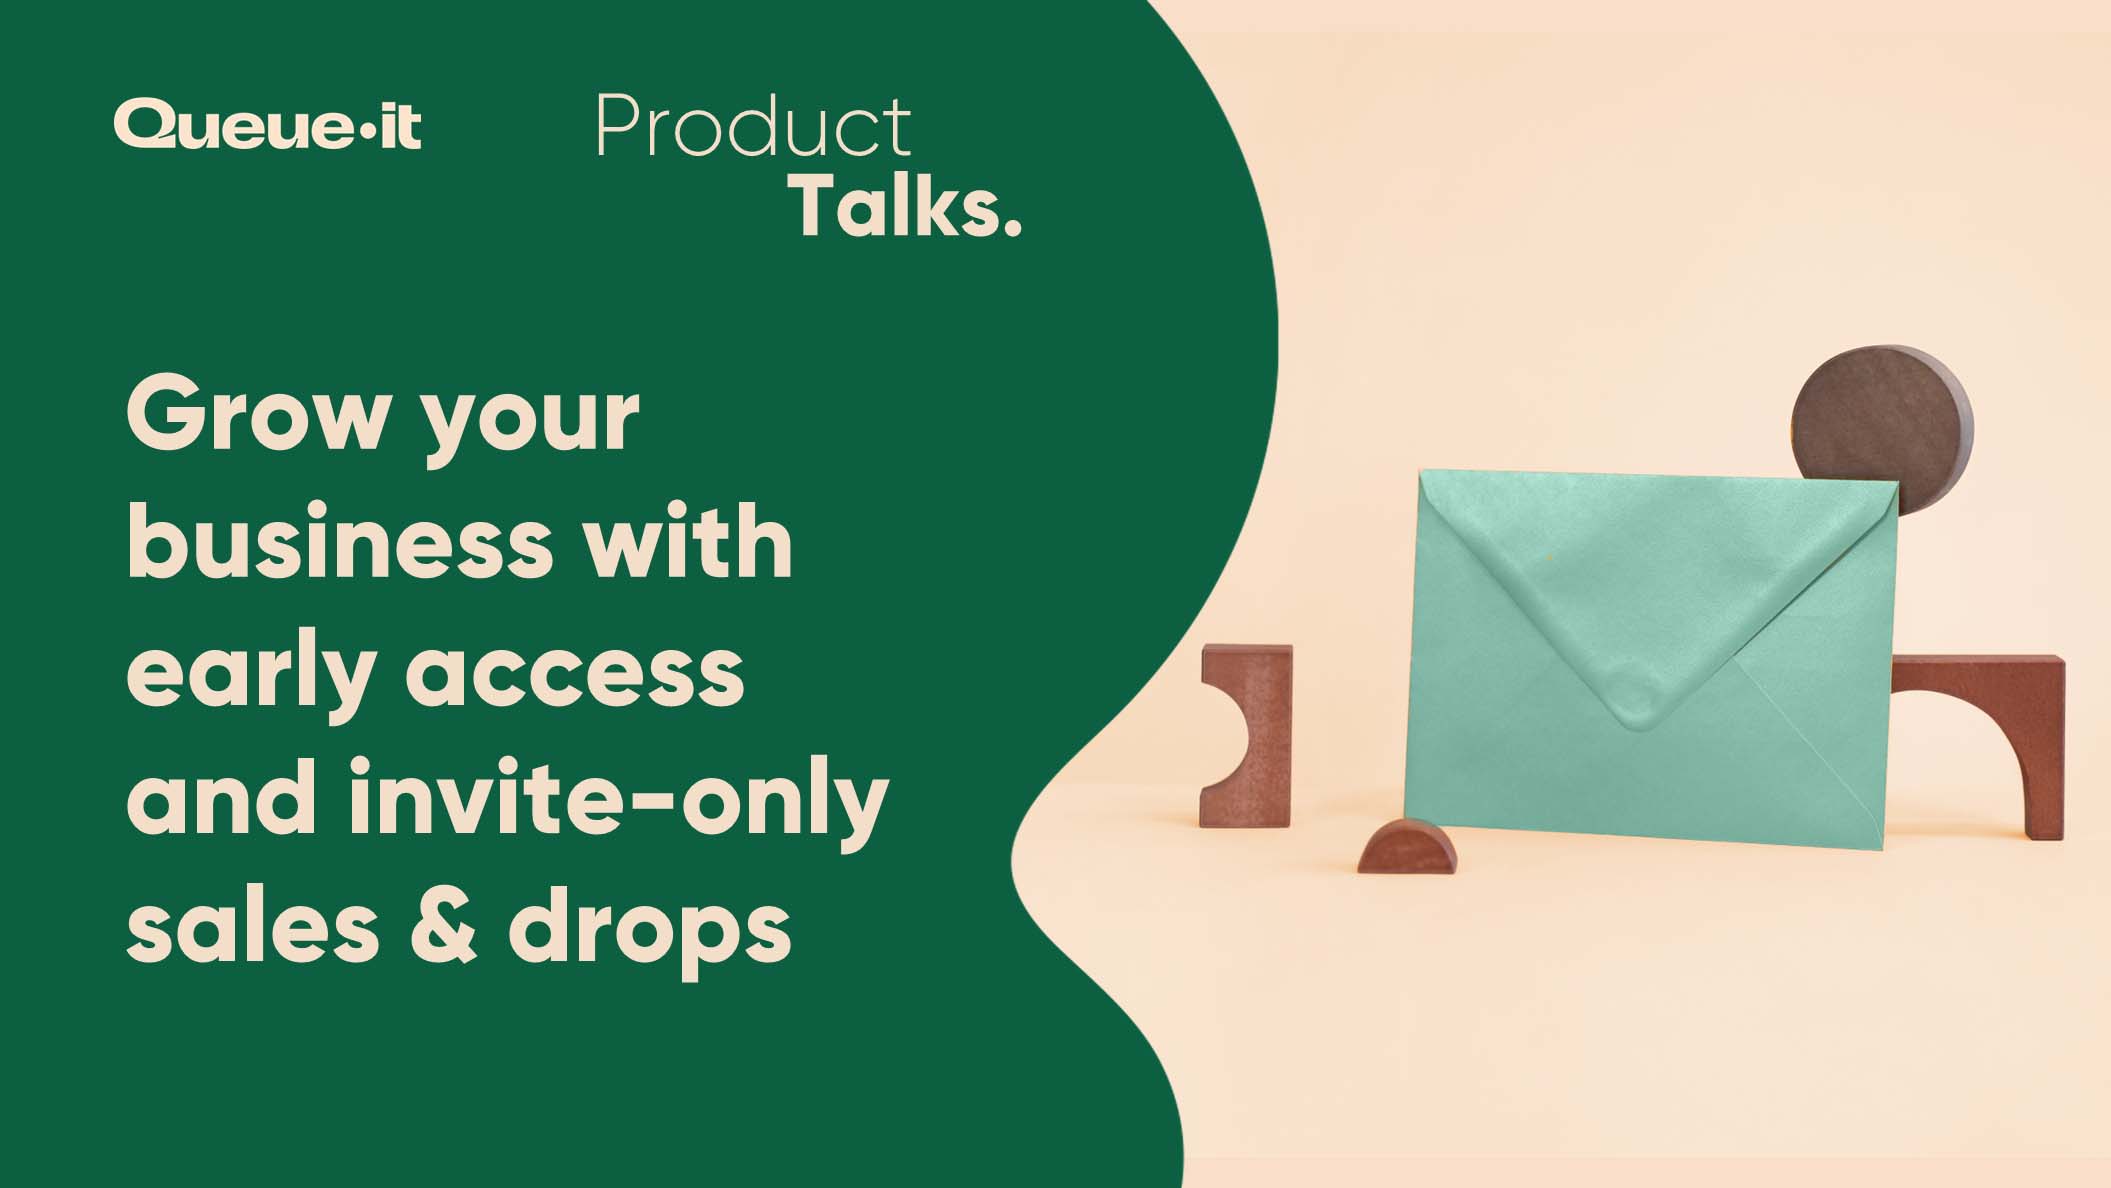 Queue-it's invite-only Product Talk